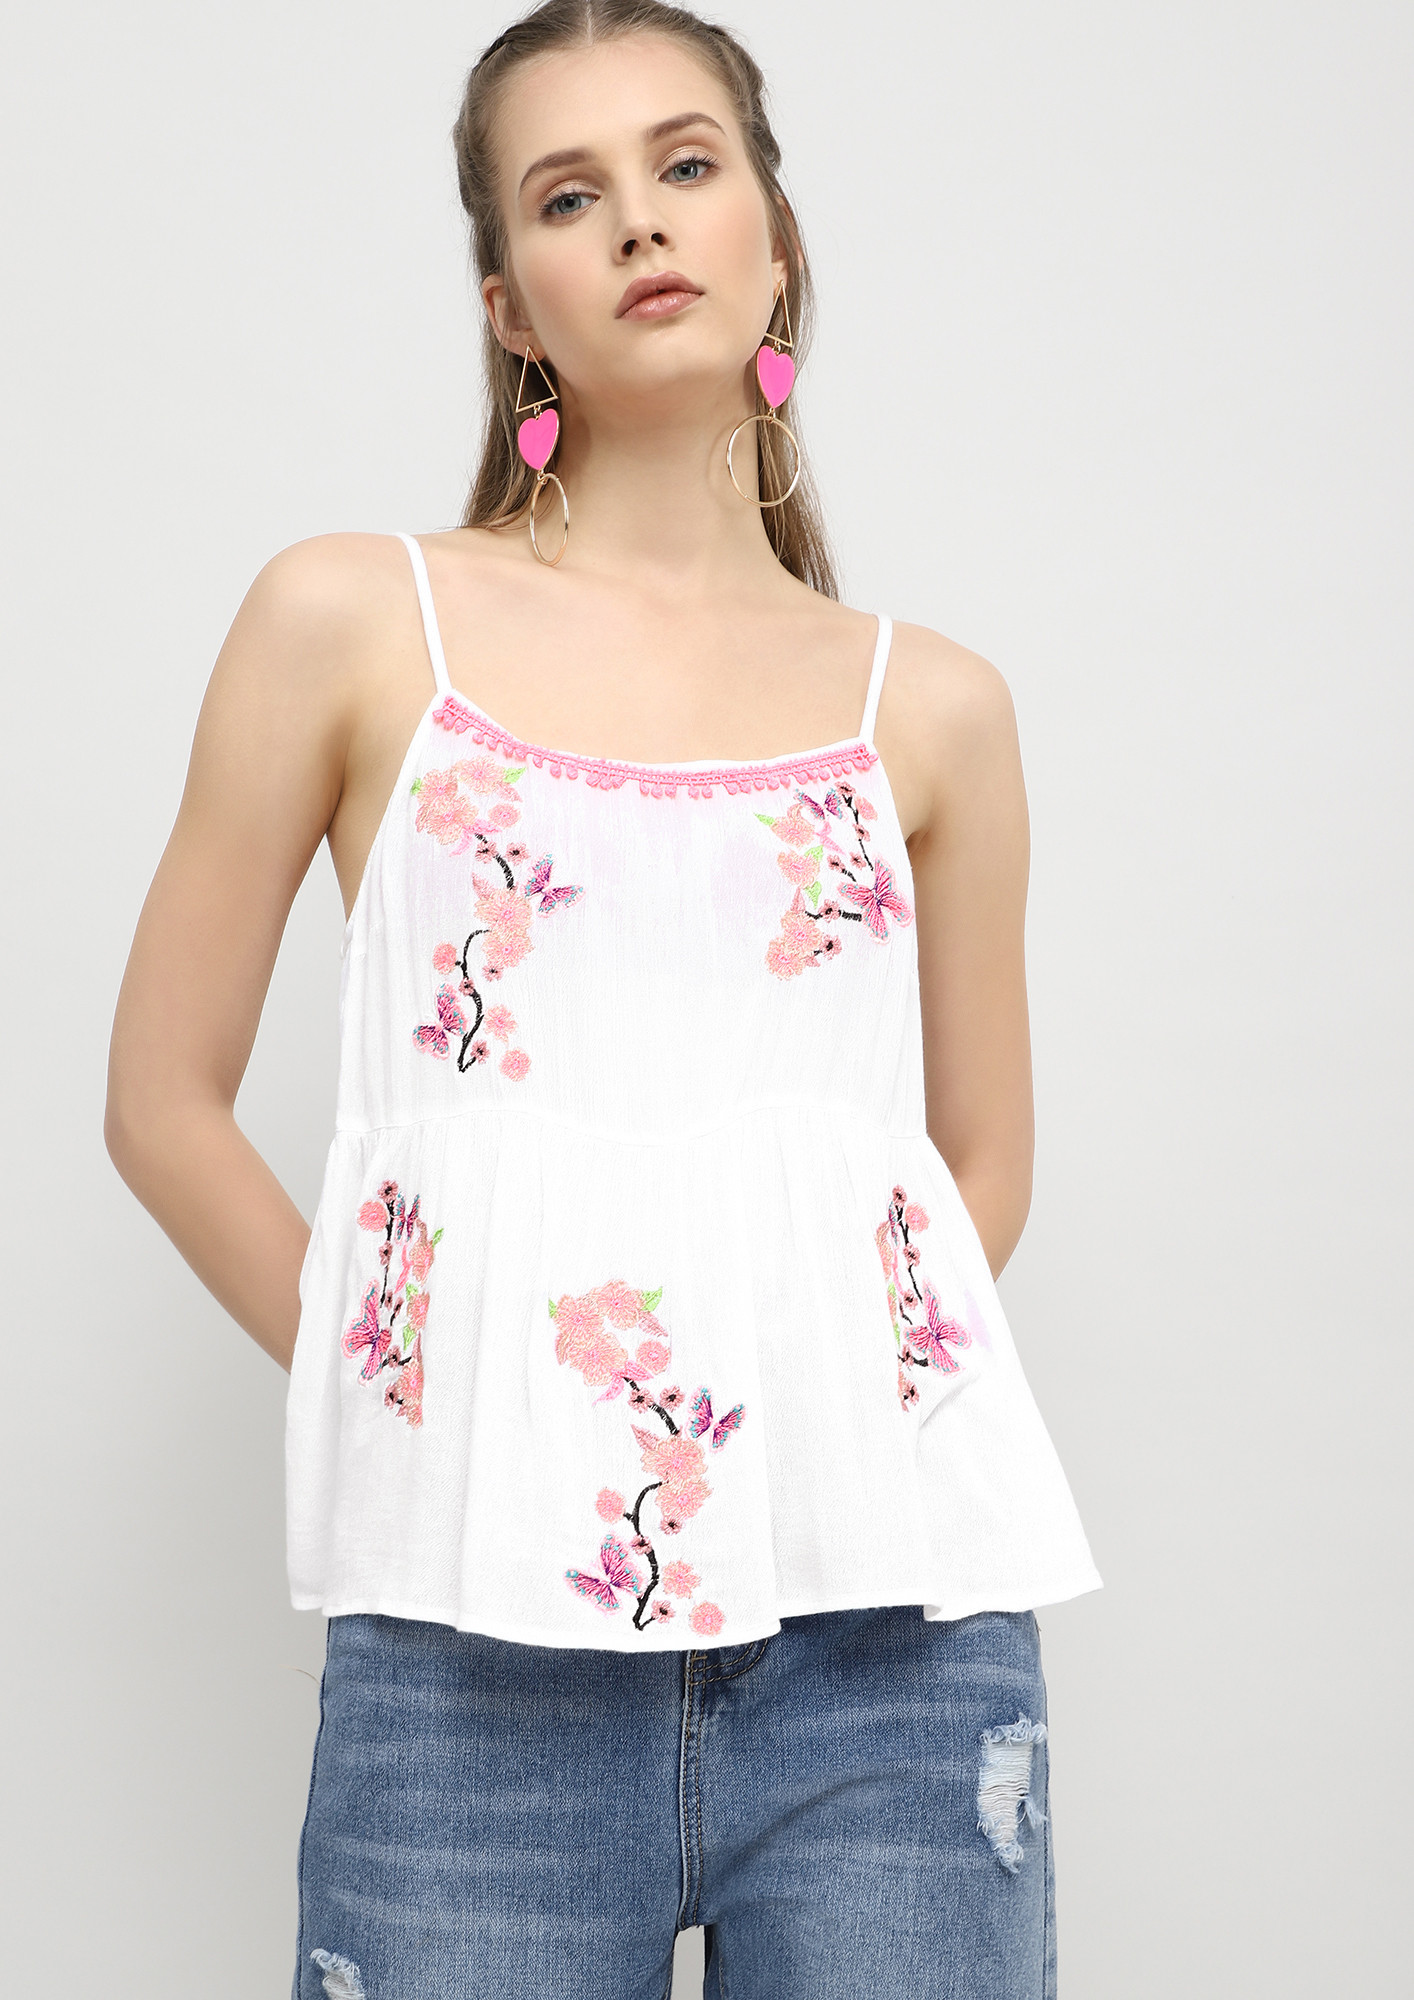 RUNNING WITH BUTTERFLIES WHITE CAMI TOP